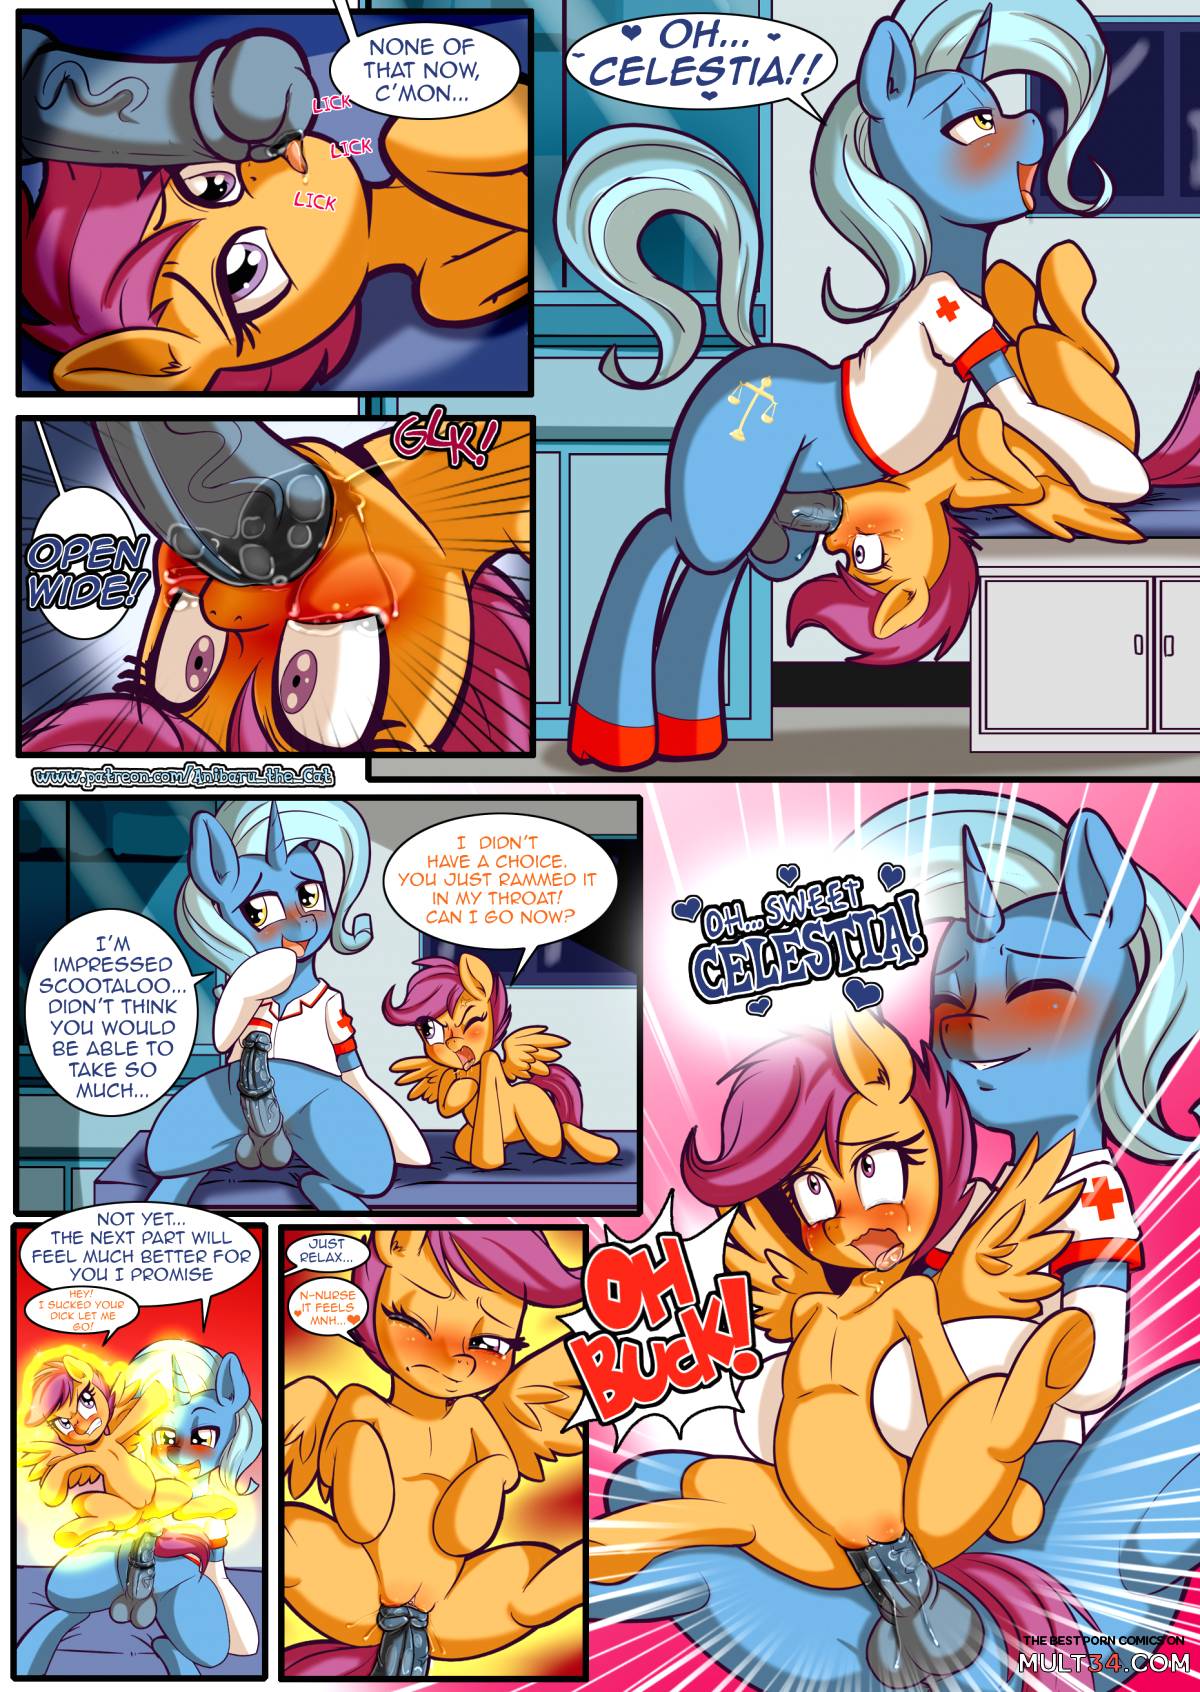 Cutie mark check up 2 page 8